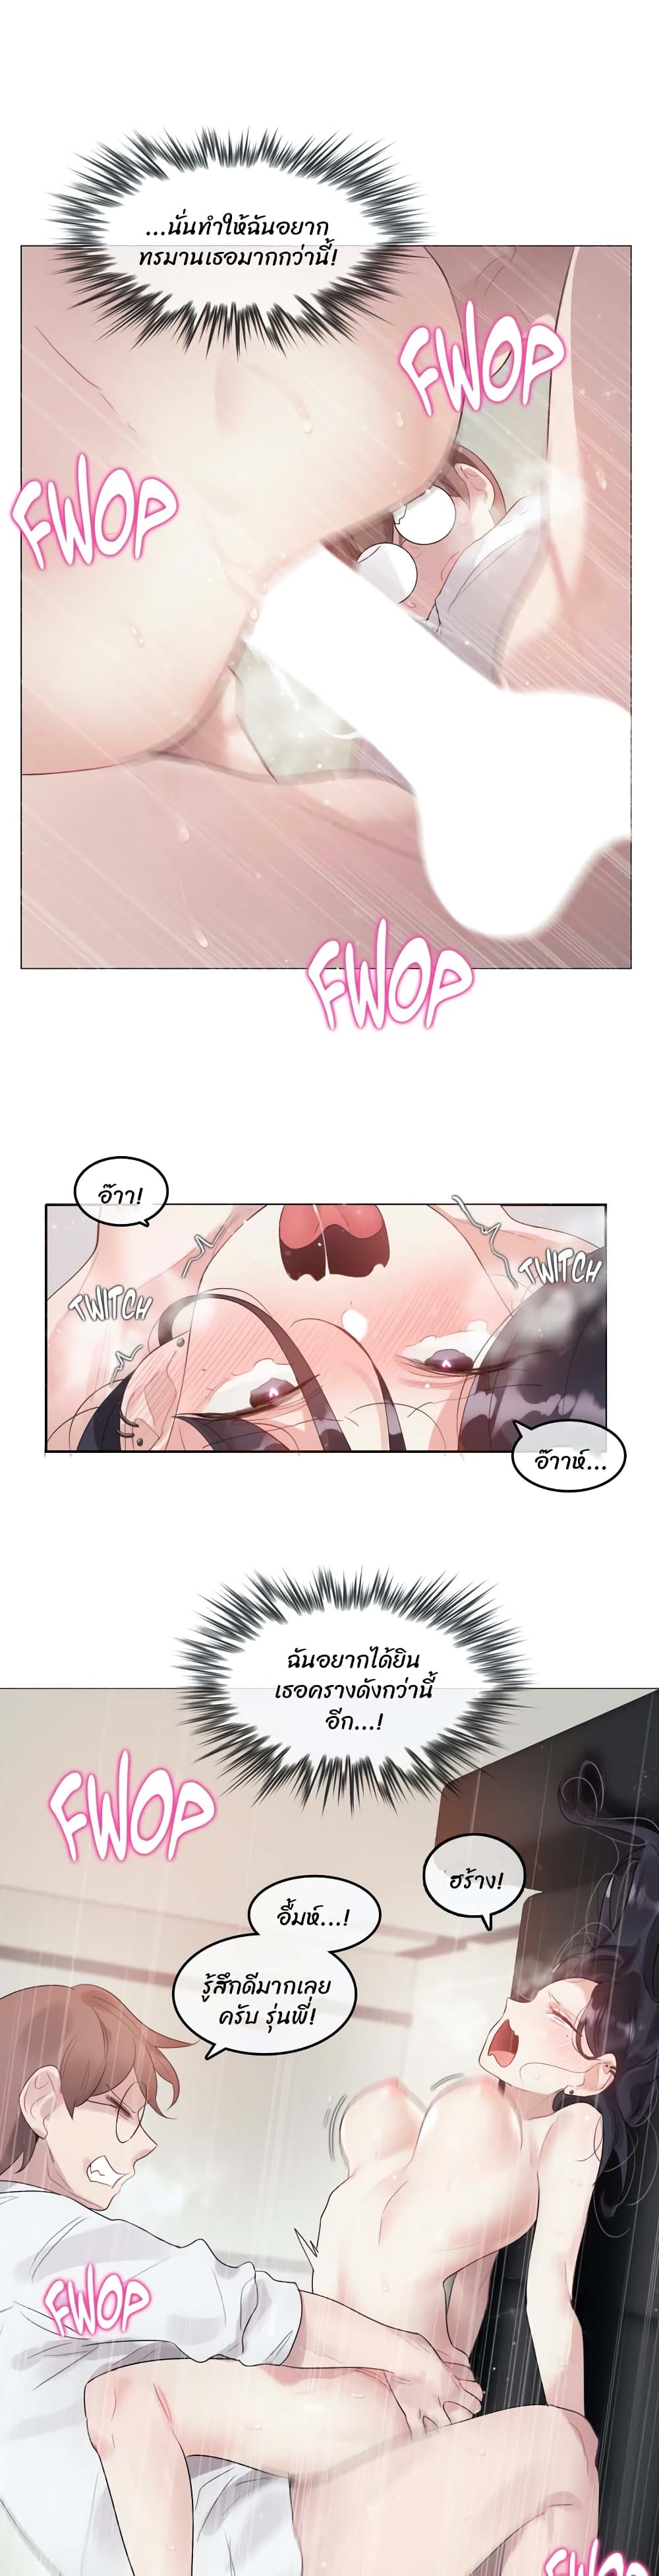 A Pervert's Daily Life 103 (7)